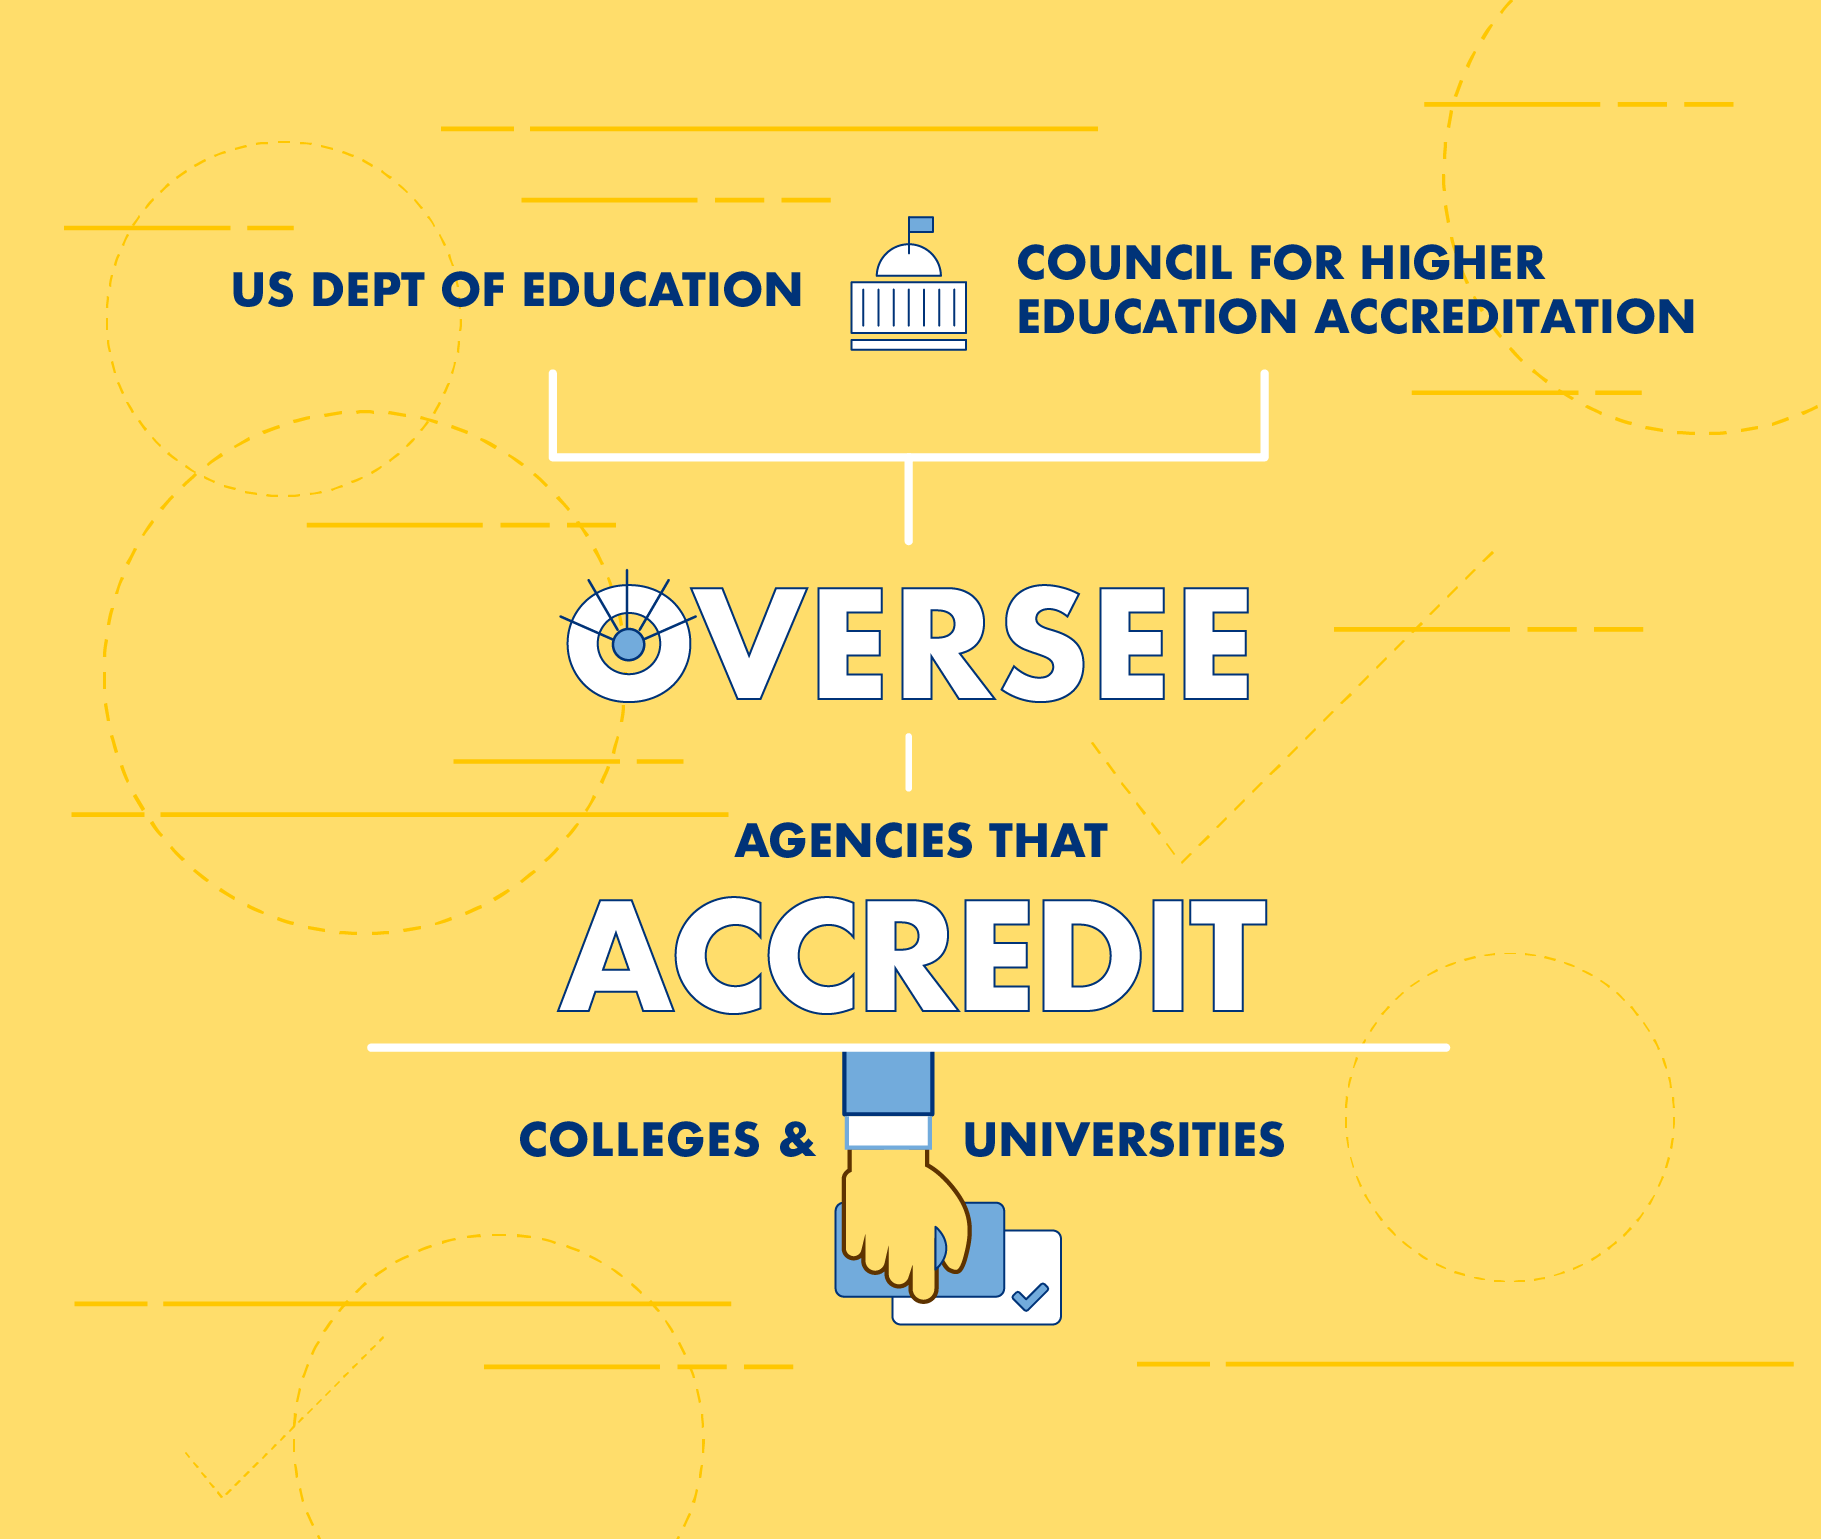 How are colleges accredited?